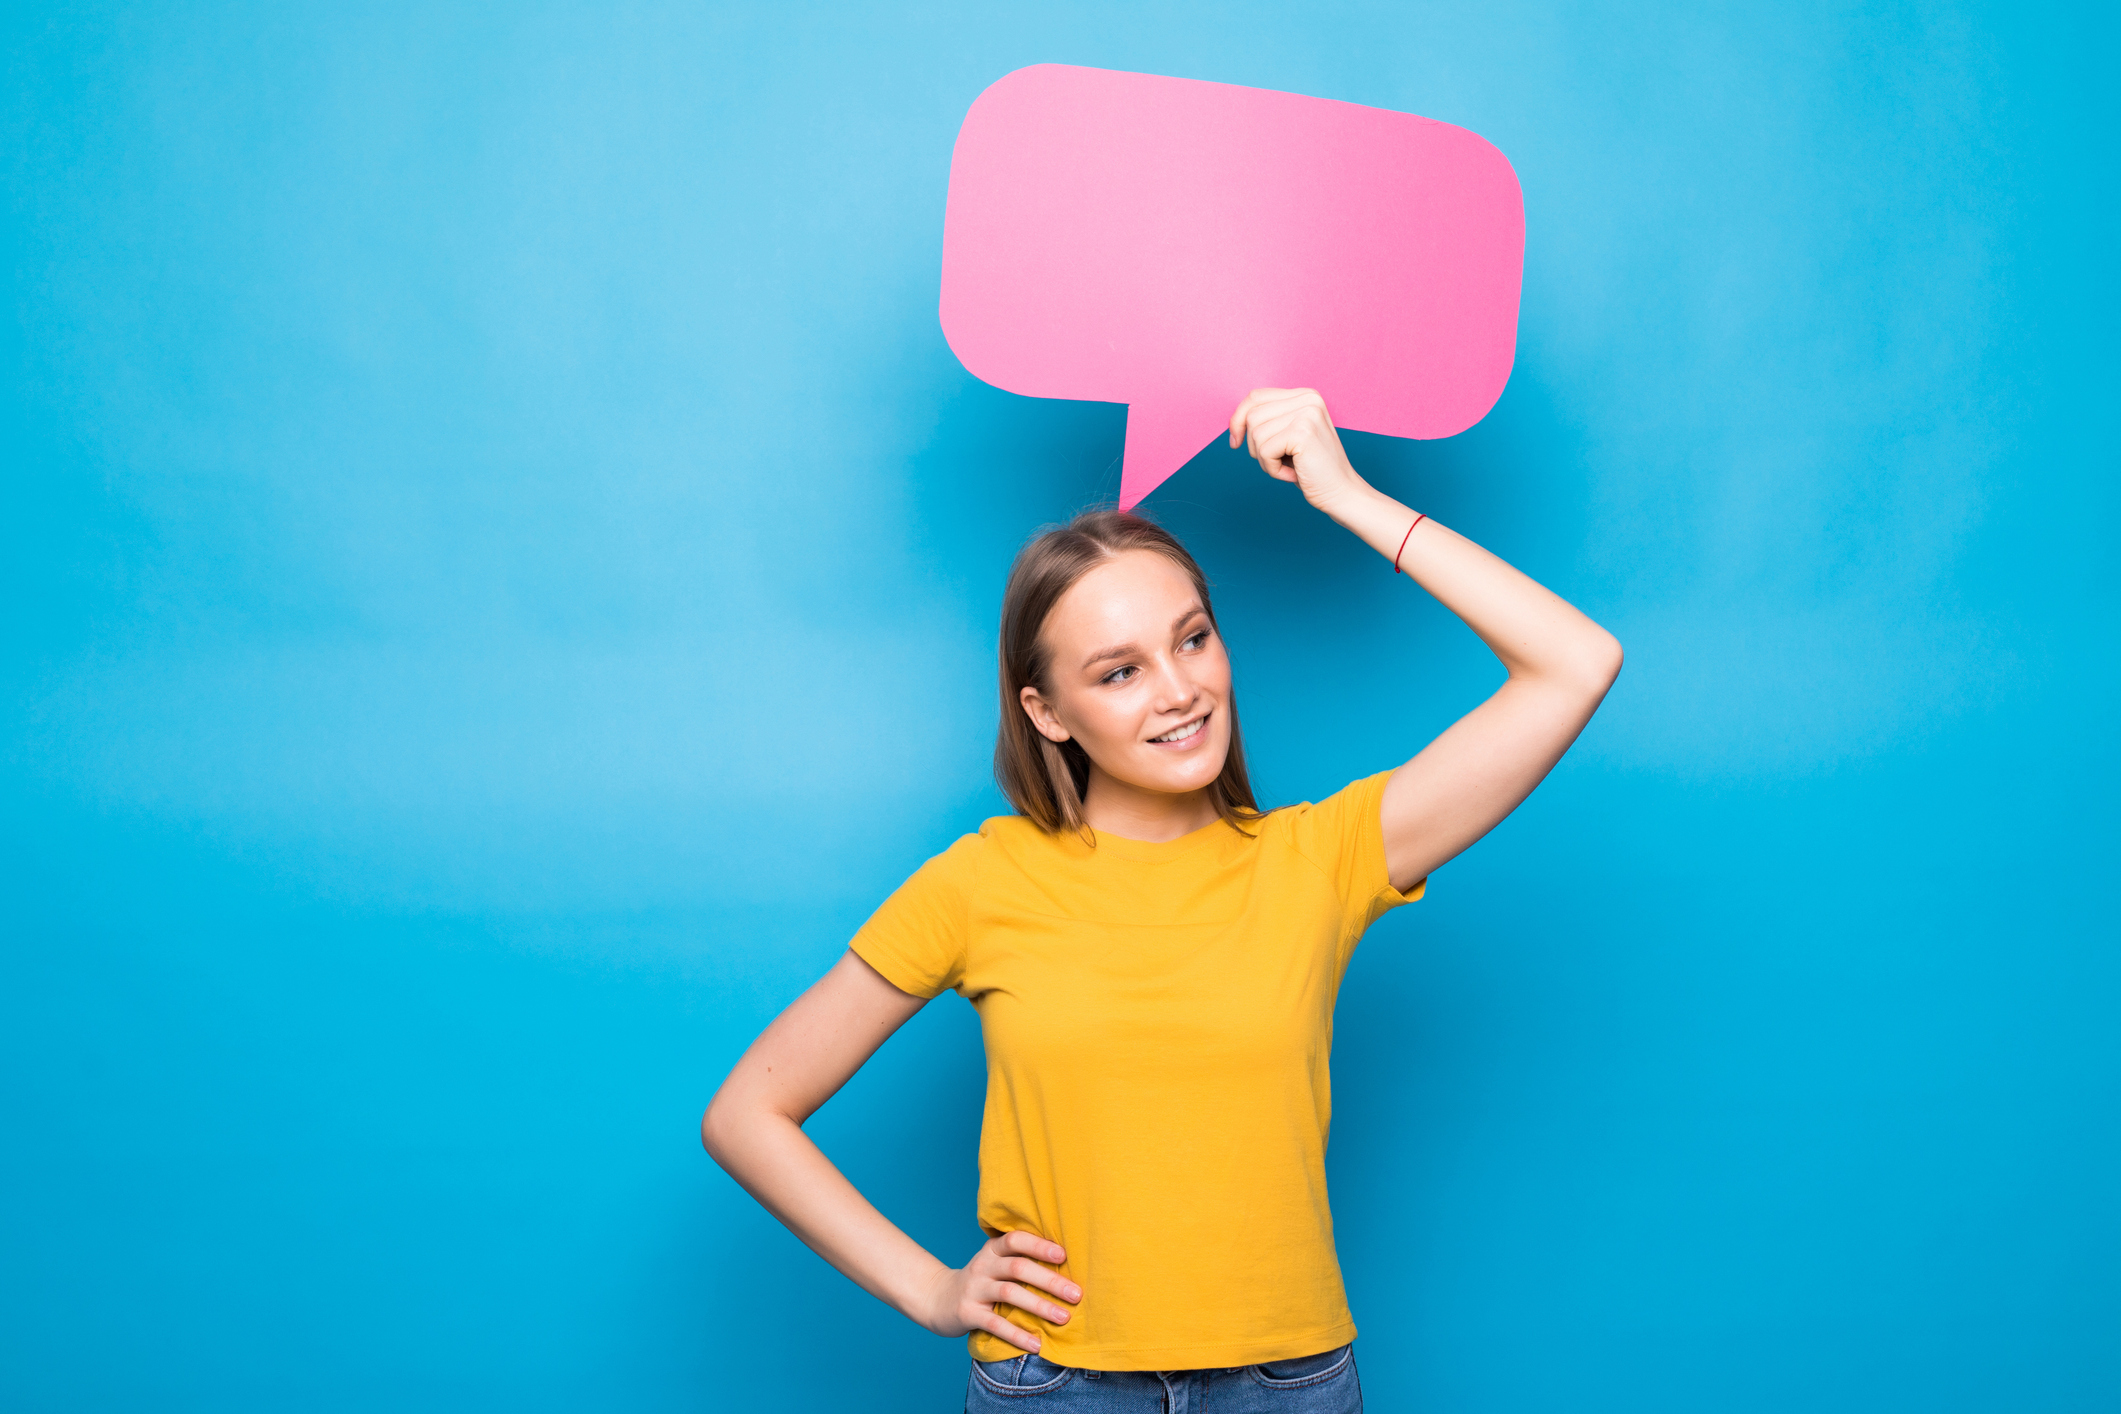 Young woman holding a speech bubble on a blue background